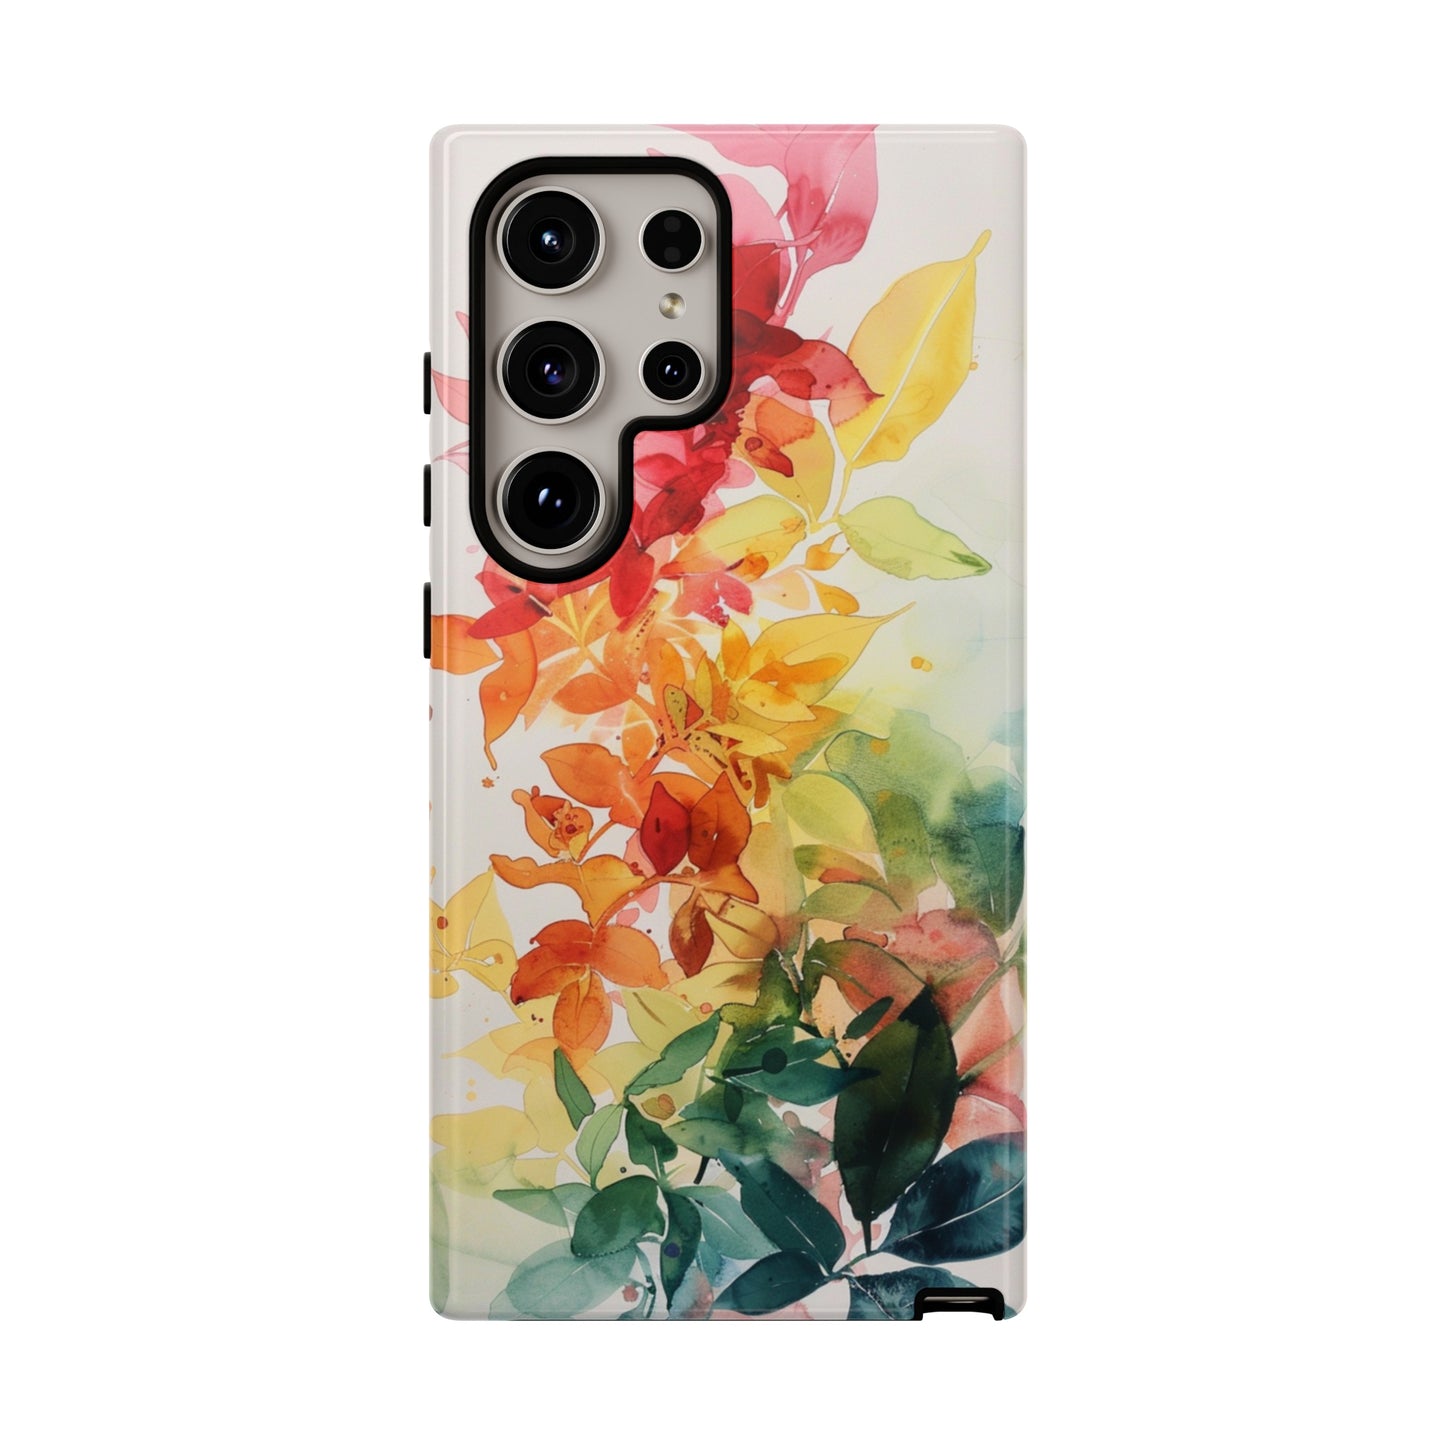 Watercolor flower design phone case for iPhone 13 case